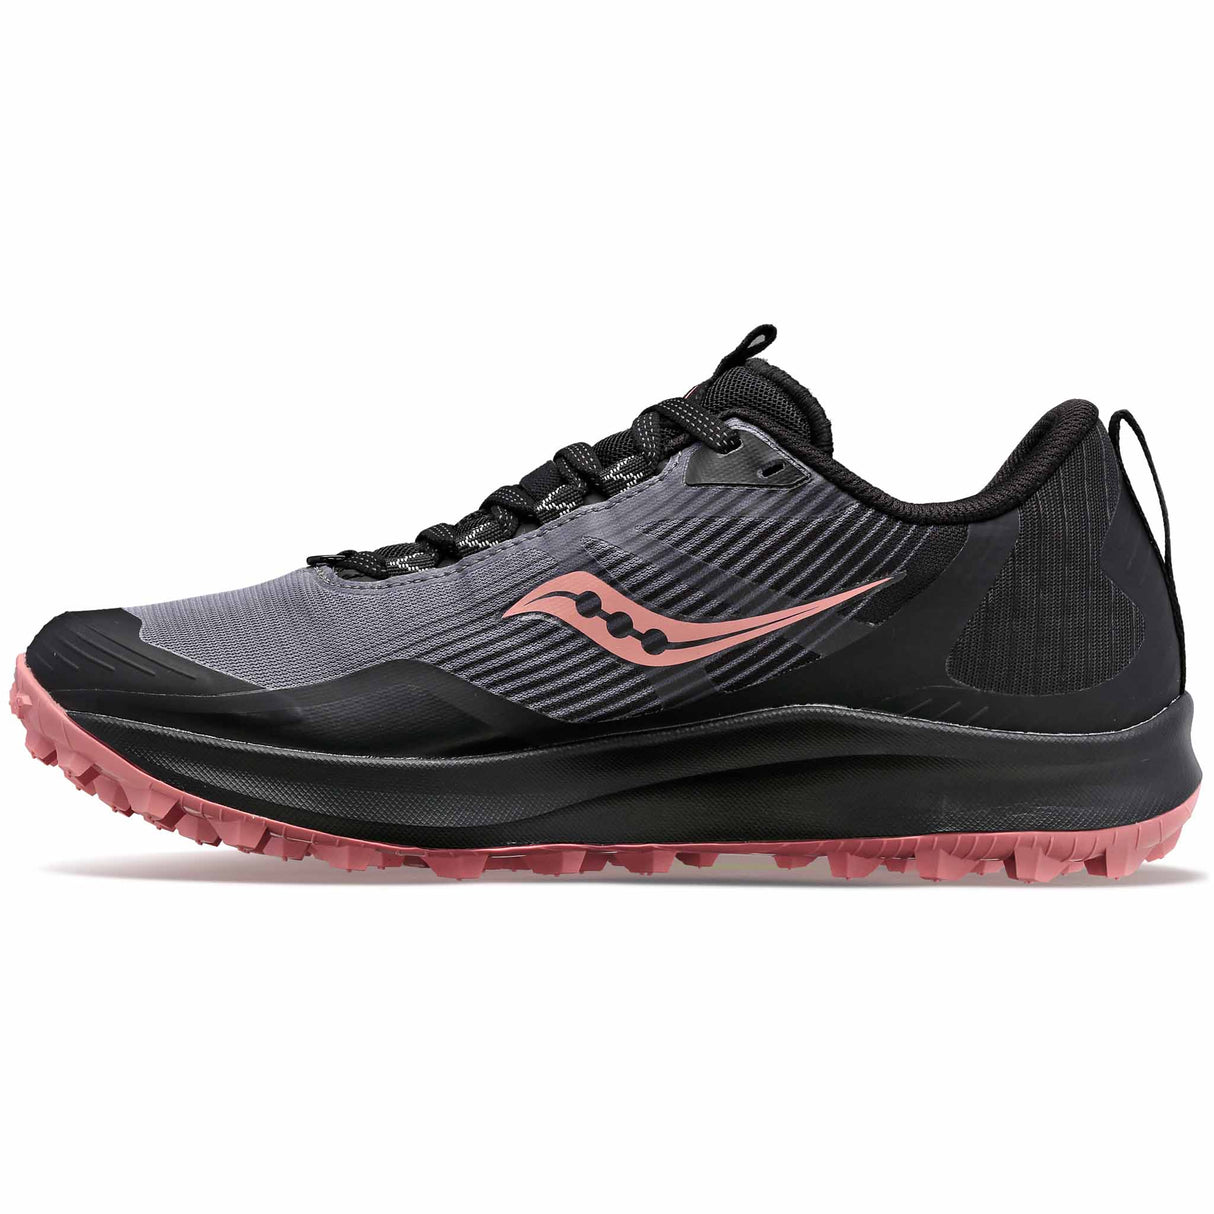 Saucony Peregrine 12 GTX running trail femme - Charcoal / Shell